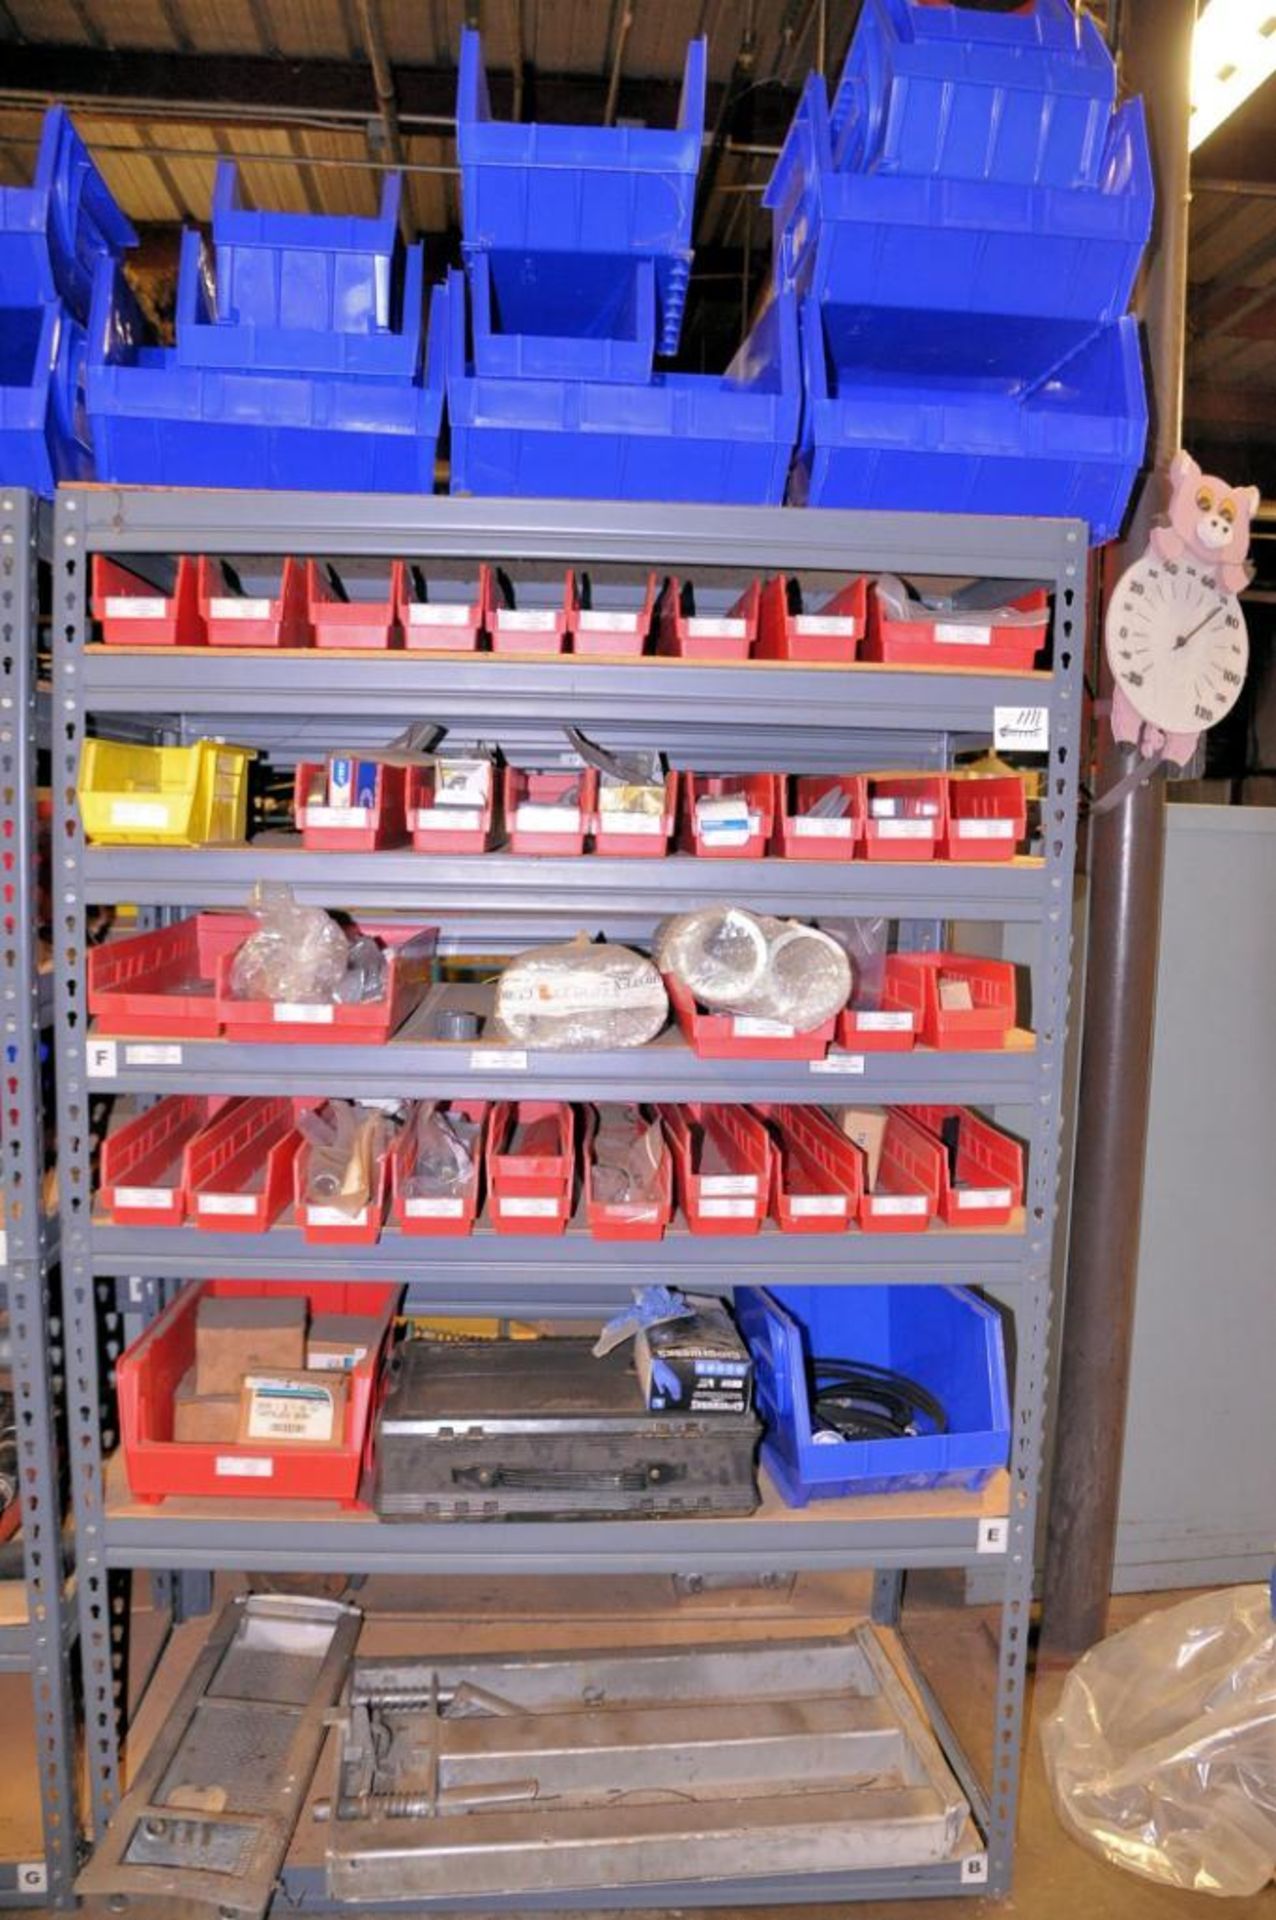 Lot - (8) Sections of Shelving with Diaphragm Pumps, Valves, Electronic Machine Parts, Pipe Fittings - Image 3 of 7